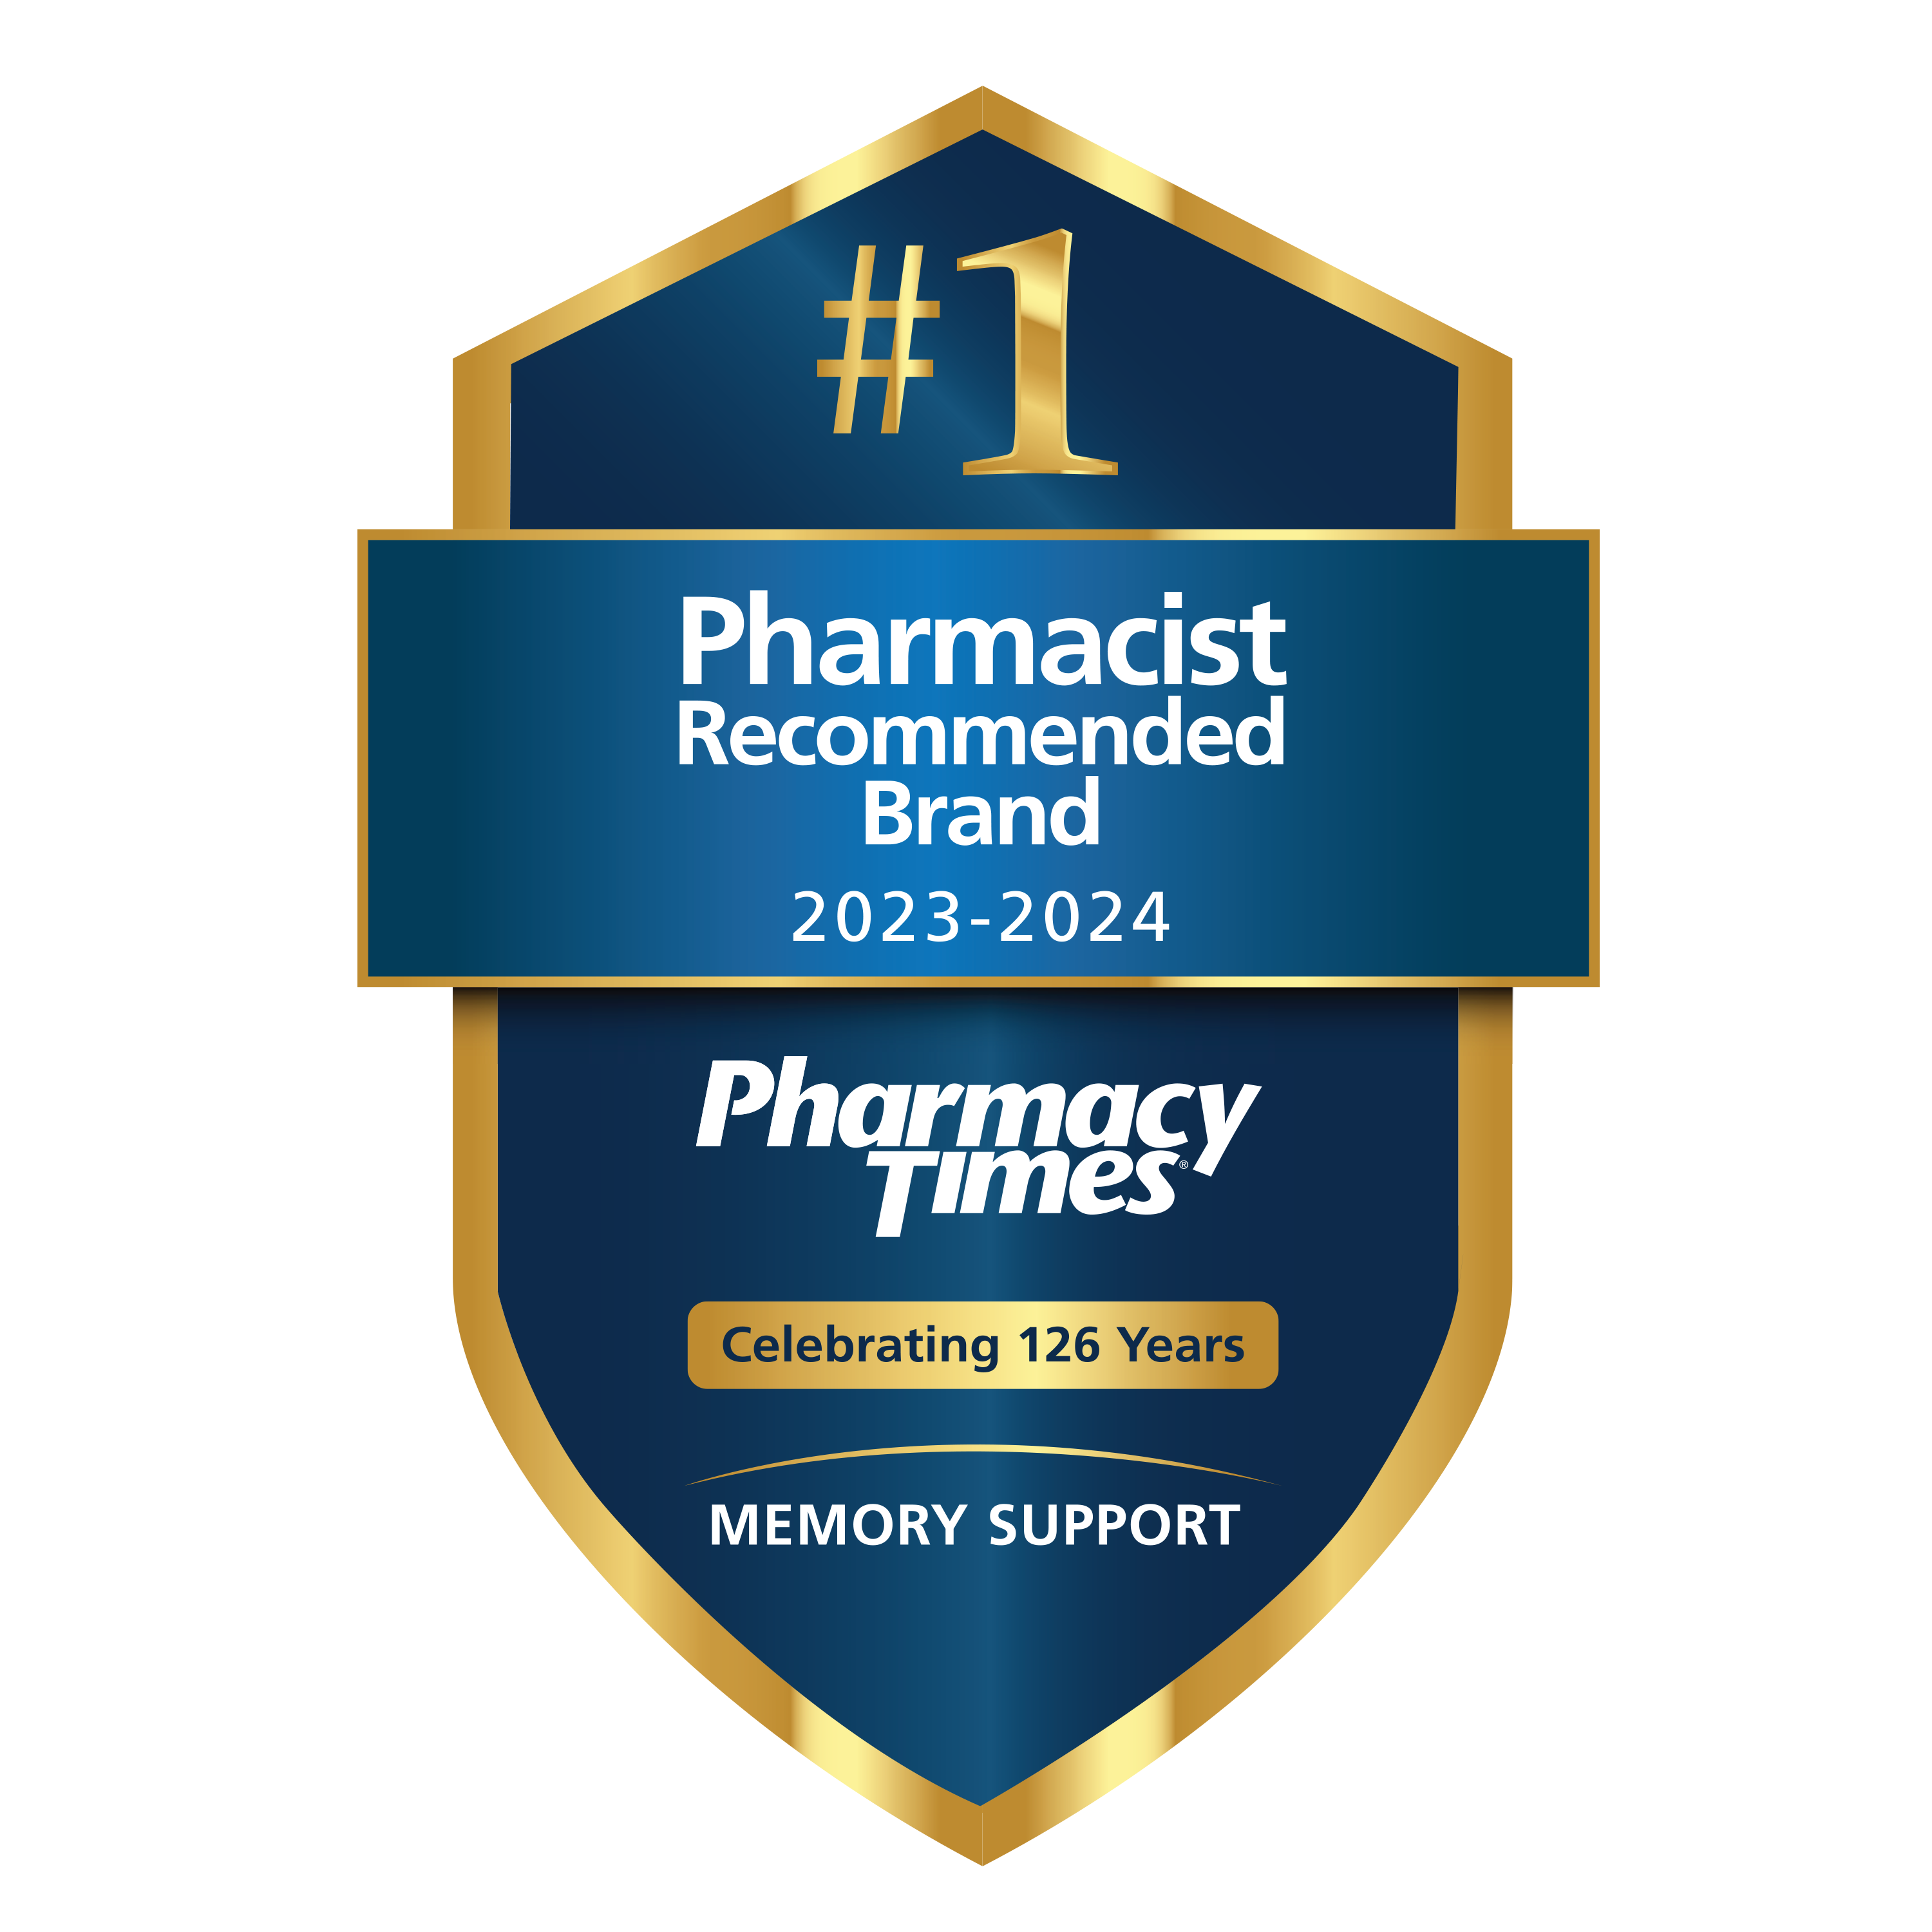 #1 Pharmacist recommended brand 2023-24 Pharmacy times Celebrating 126 years